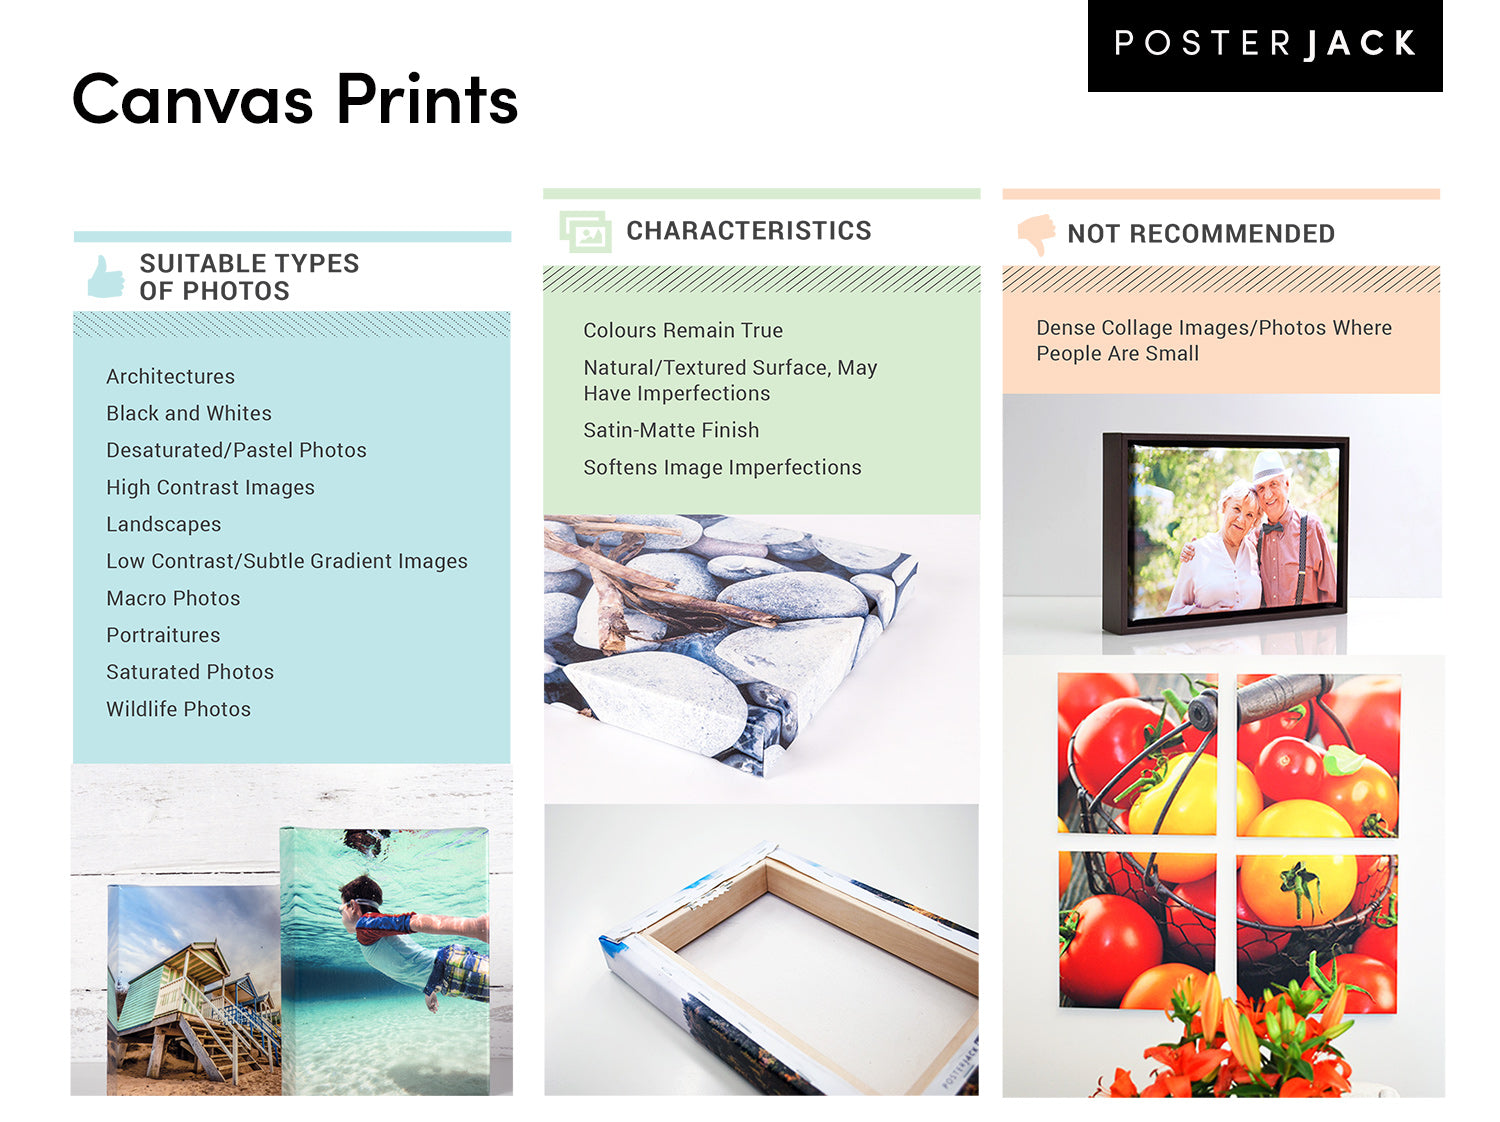 Posterjack Canvas Prints chart showing suitable types of photos that look good printed on canvas